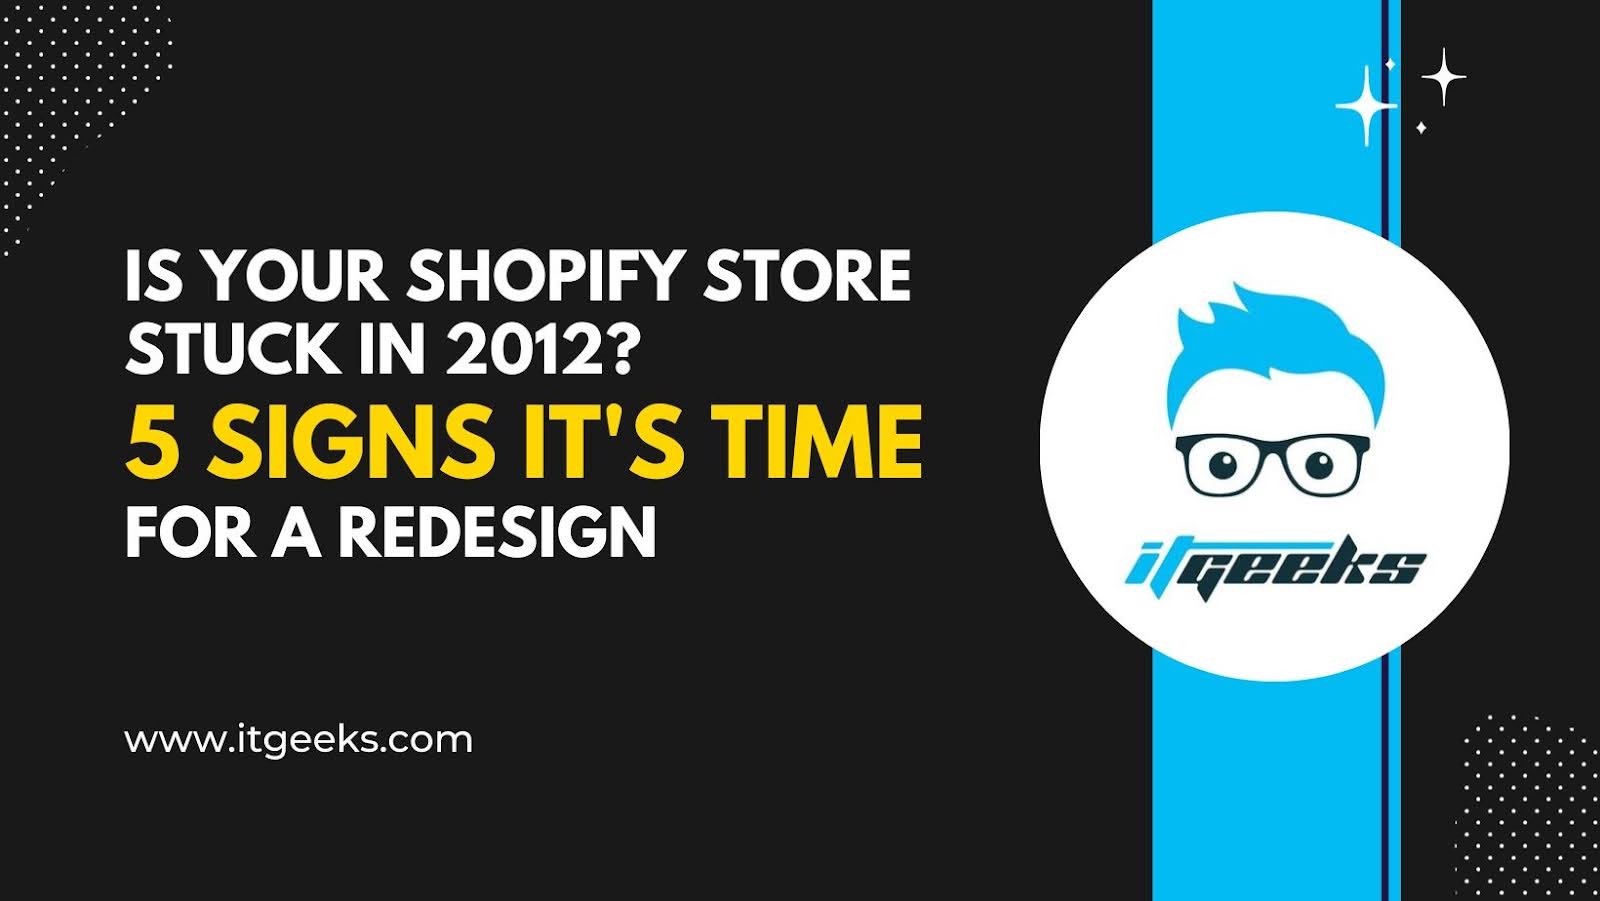 Is Your Shopify Store Stuck in 2012? 5 Signs It’s Time for a Redesign